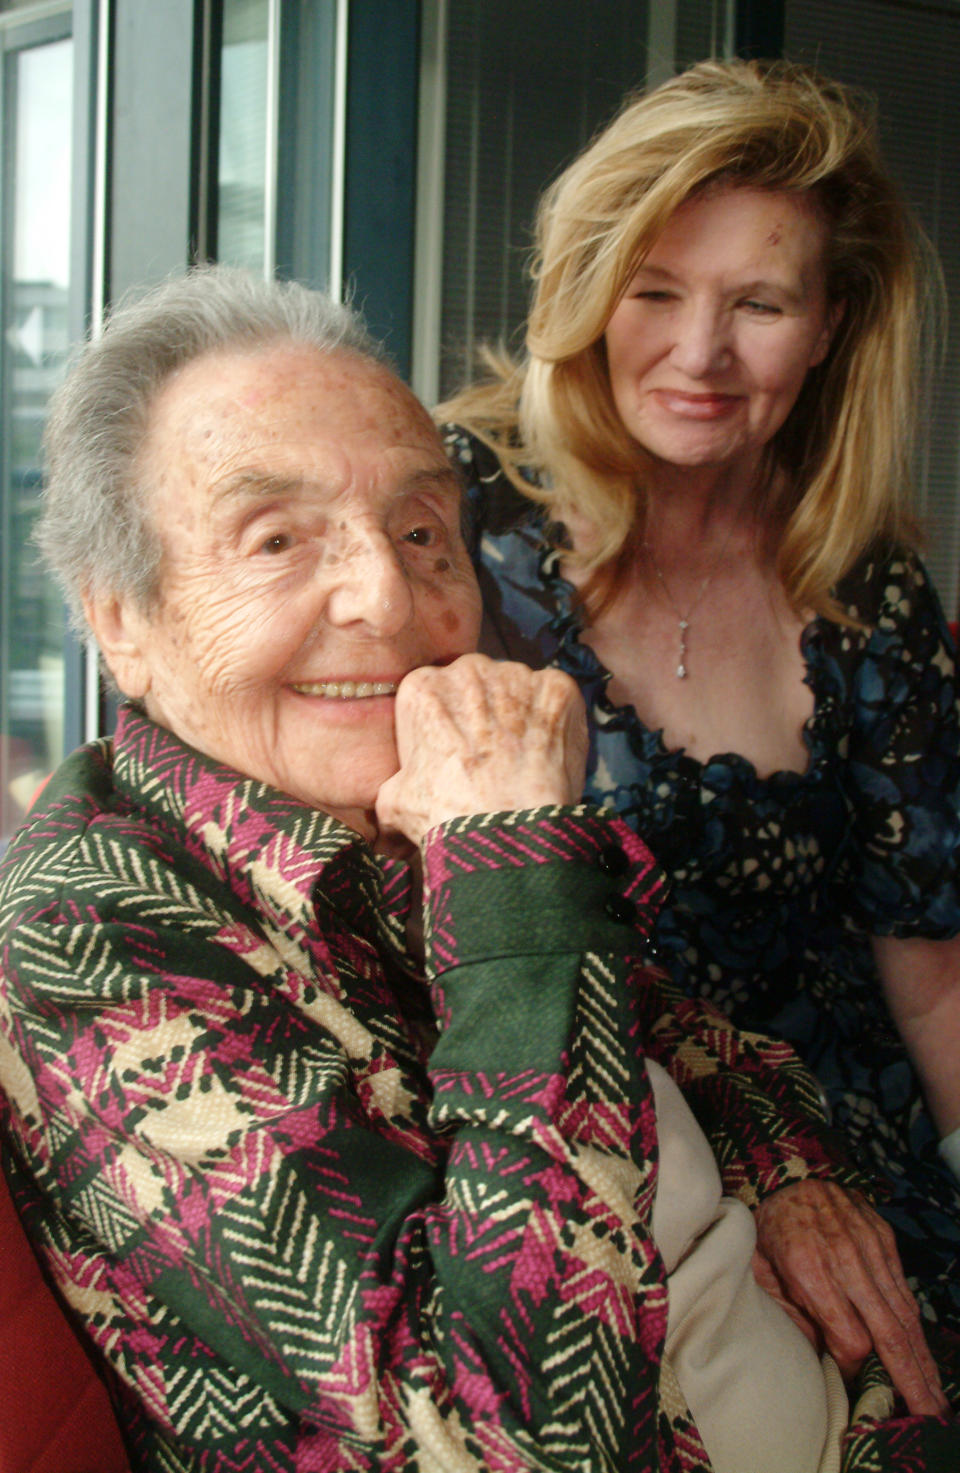 Alice Herz-Sommer, believed to be the oldest-known survivor of the Holocaust, who died in London on Sunday morning at the age of 110, pictured in this Aug. 2007 photo with Caroline Stoessinger who compiled Herz-Sommers' memories in a book, A Century of Wisdom. Born in 1903 Prague to a family of Jewish intellectuals and musicians, Alice Herz-Sommer socialised with the likes of Kafka and Brod. But in 1943, Alice, a prominent concert pianist, her husband and young son, were deported to Theresienstadt concentration camp. (AP Photo/ Polly Handcock)